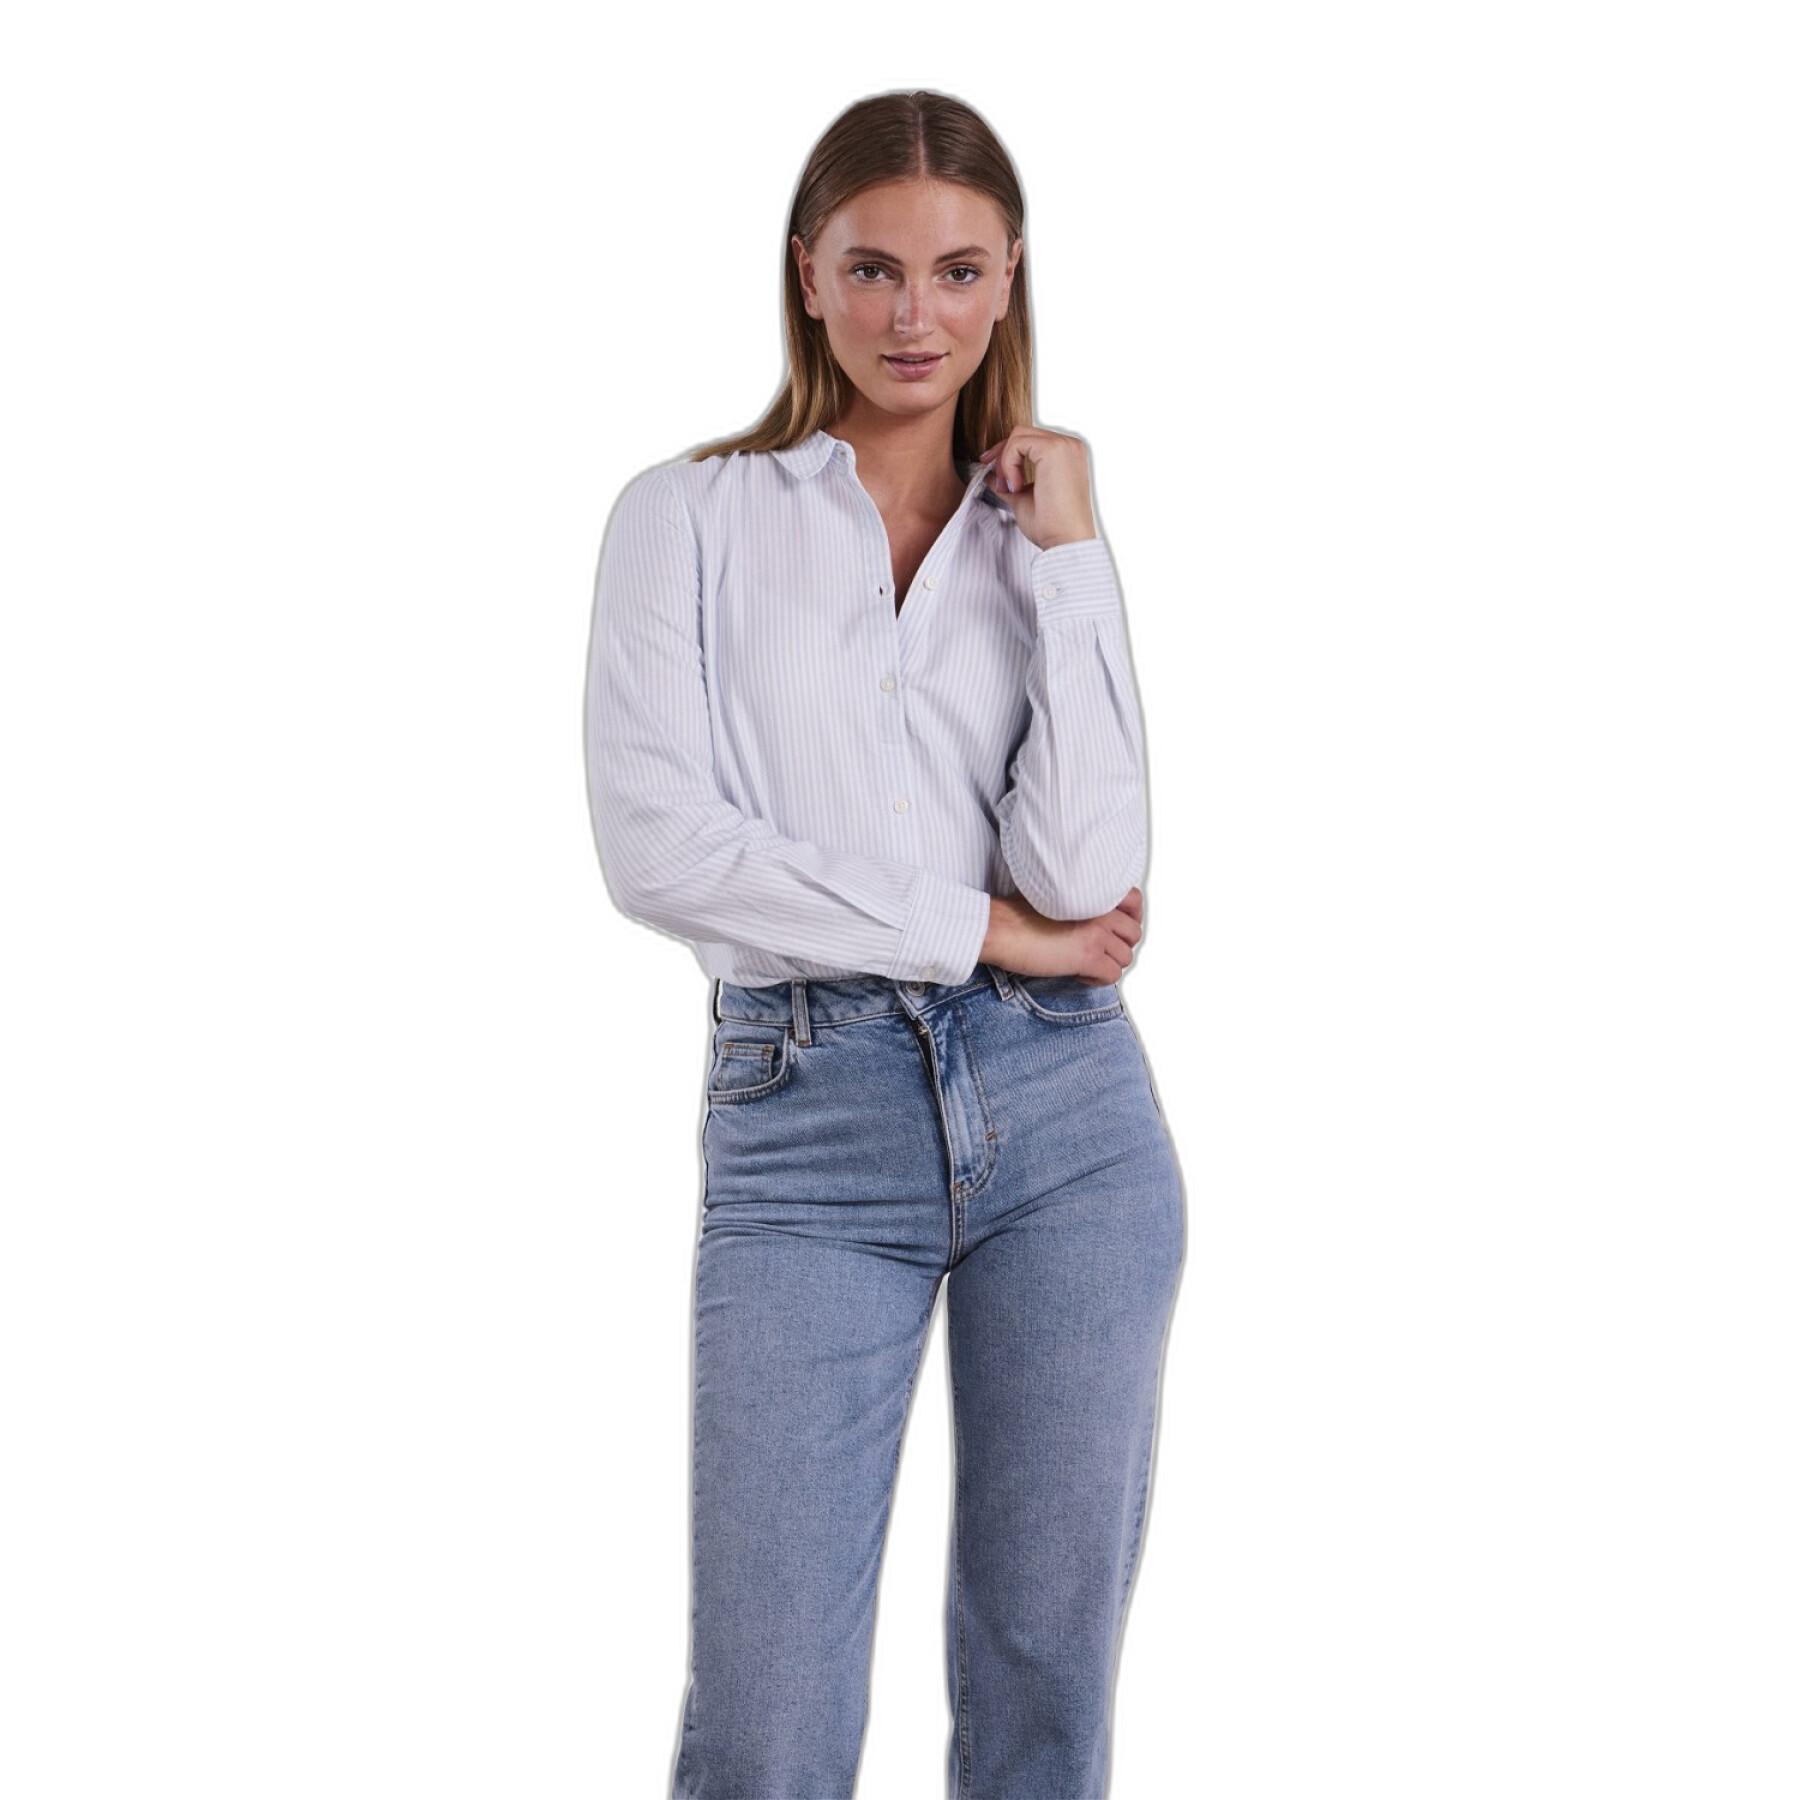 Woman's shirt Pieces Irena Oxford